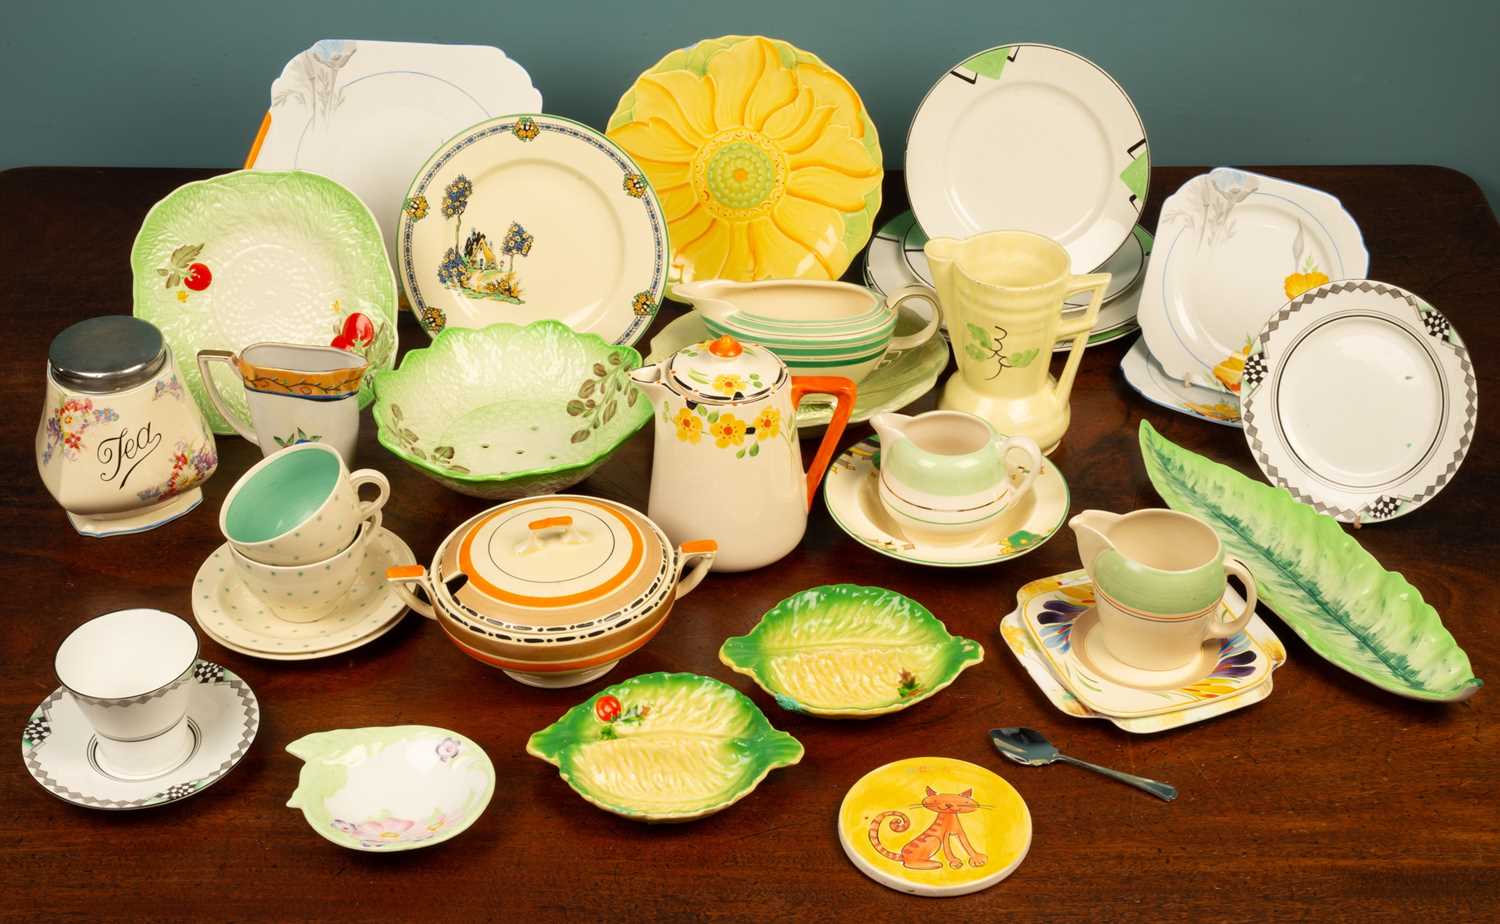 Lot 77 - A collection of early 20th century Art Deco ceramics by Bursley, H J Wood, Susie Cooper, Carltonware, etc